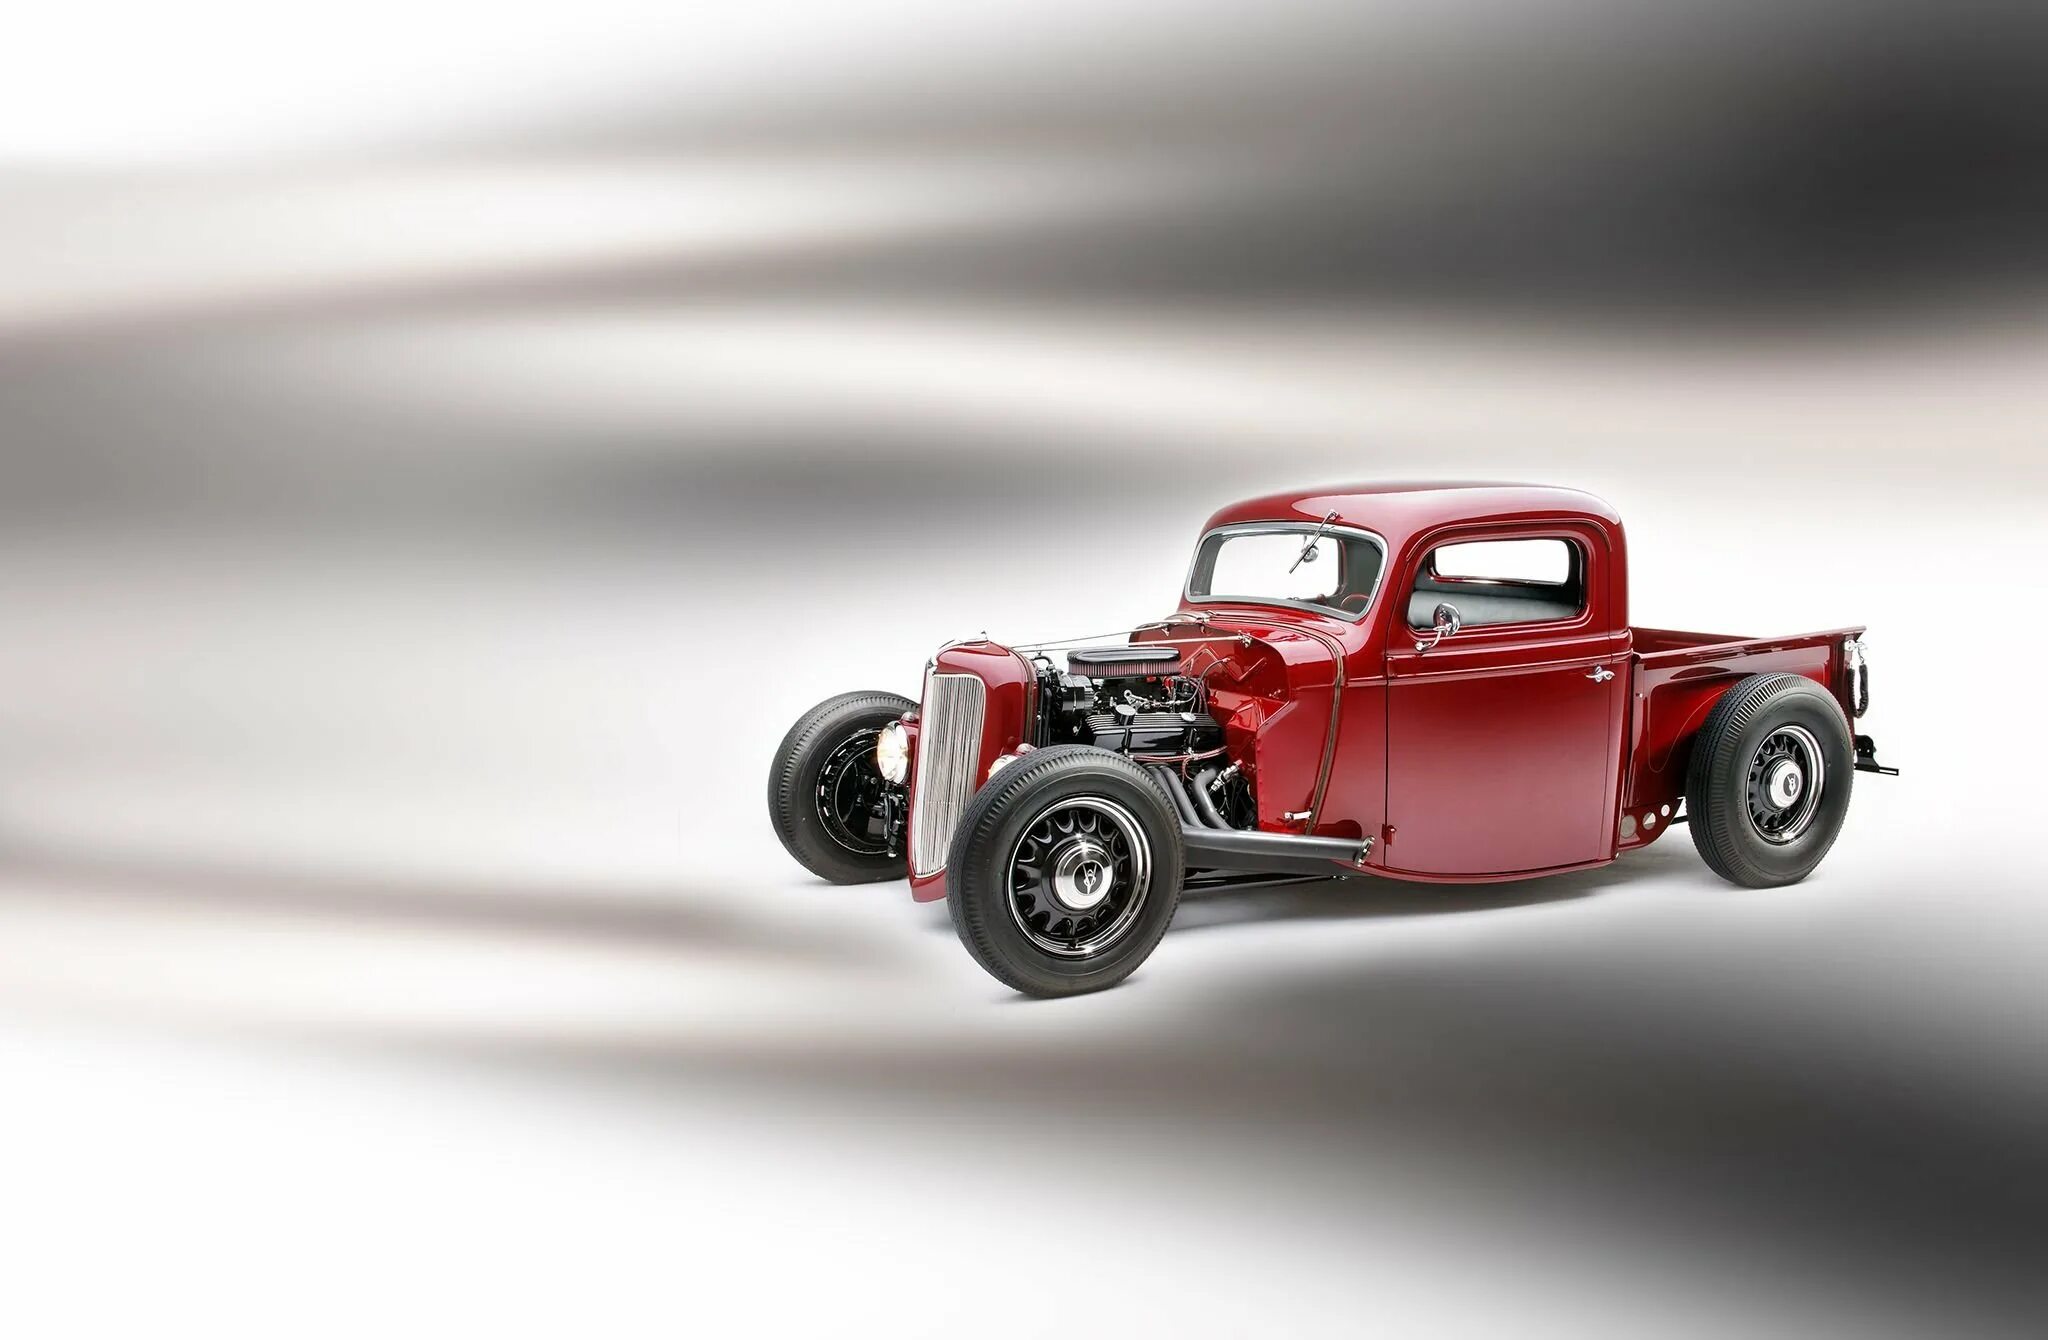 Hot pick up. Ford Truck 1935. Ford пикап 1935. 1935 Ford hot Rod. Хот род пикап.